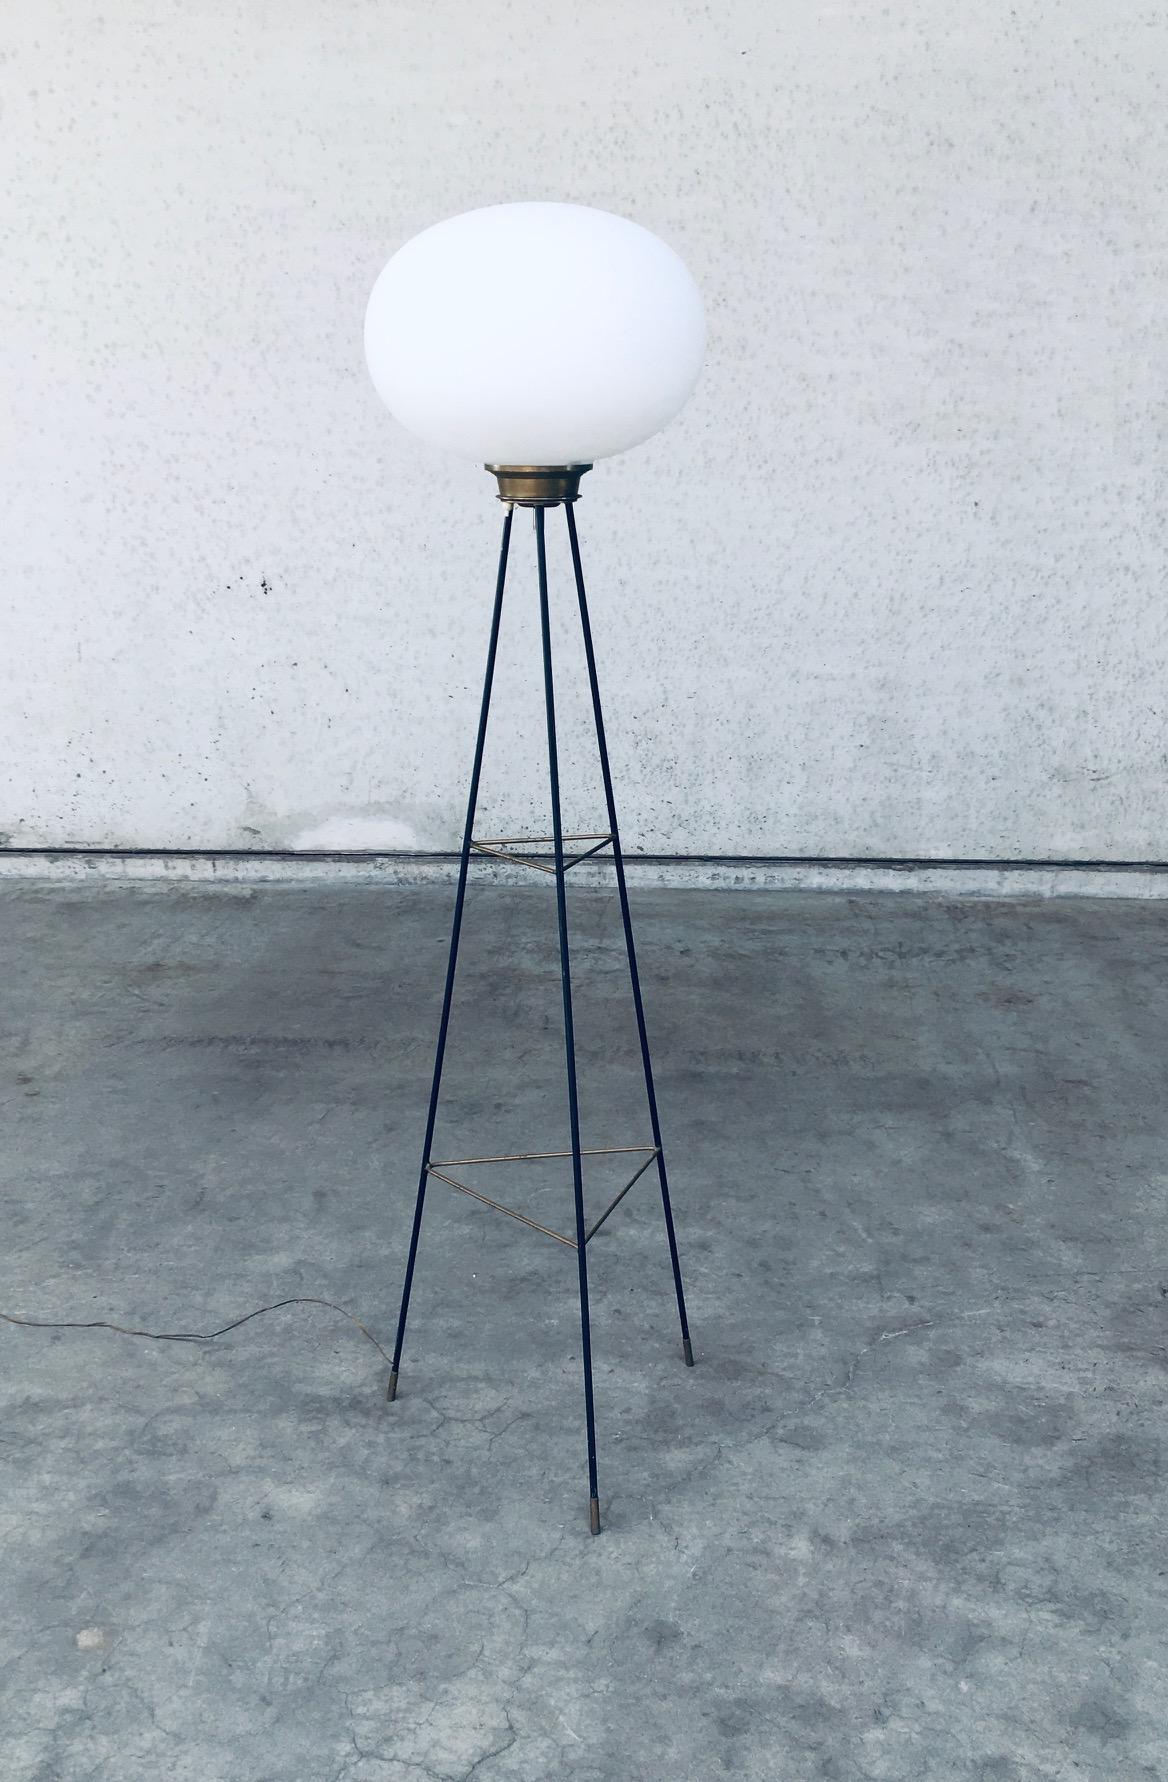 Vintage Midcentury Modern Italian Design in the manner of Stilnovo Tripod Floor Lamp. Made in Italy, 1950's. Brass and lacquer tripod base with white opaline ball shade. This fragile minimalistic designed lamp gives a nice soft glow. A rare lamp in